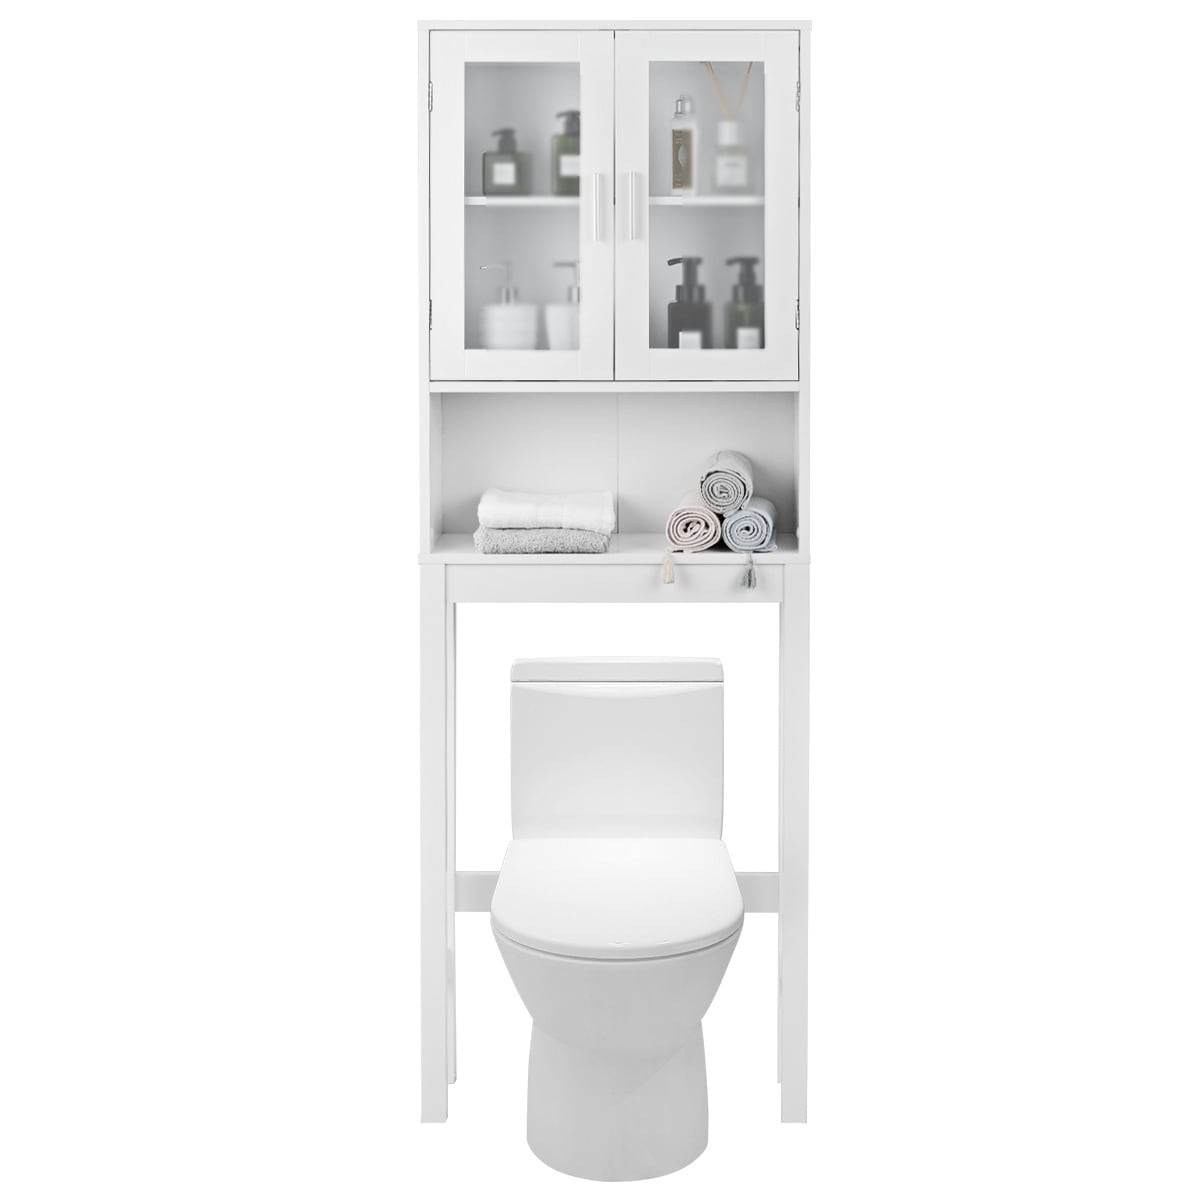 https://ak1.ostkcdn.com/images/products/is/images/direct/6be242b412b913c69a42290b83917c4ecf8384bc/Costway-Wooden-Over-The-Toilet-Storage-Cabinet-Spacesaver-Organizer-Bathroom-Tower-Rack.jpg